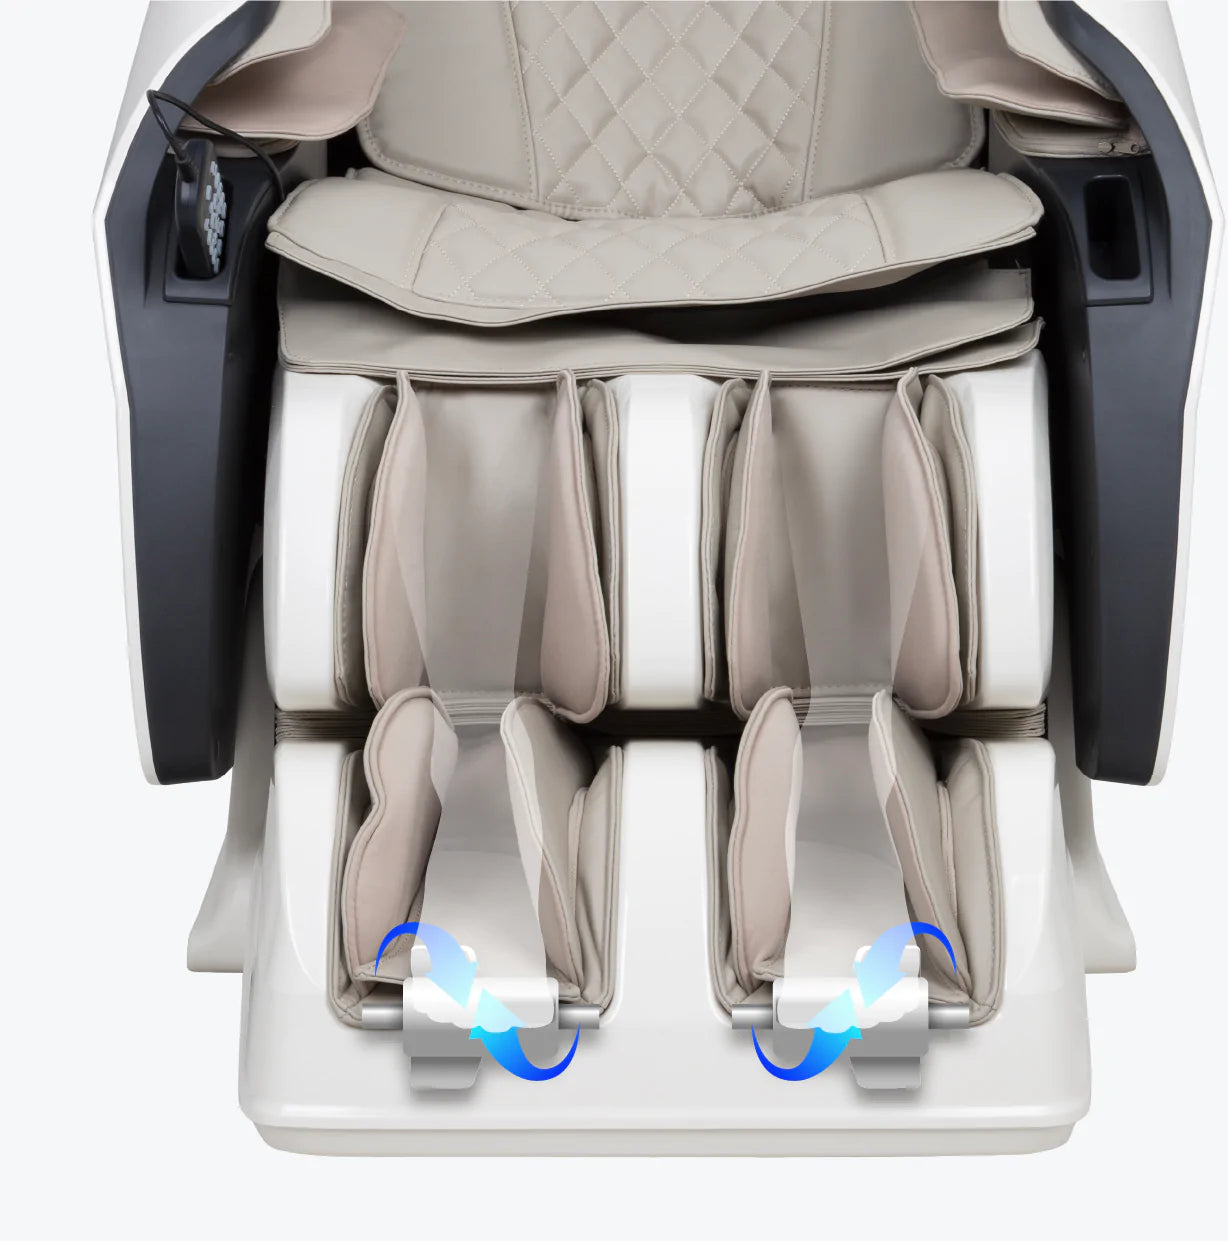 The Osaki Vista Massage Chair uses soothing foot rollers combined with air compression for an invigorating foot massage. 